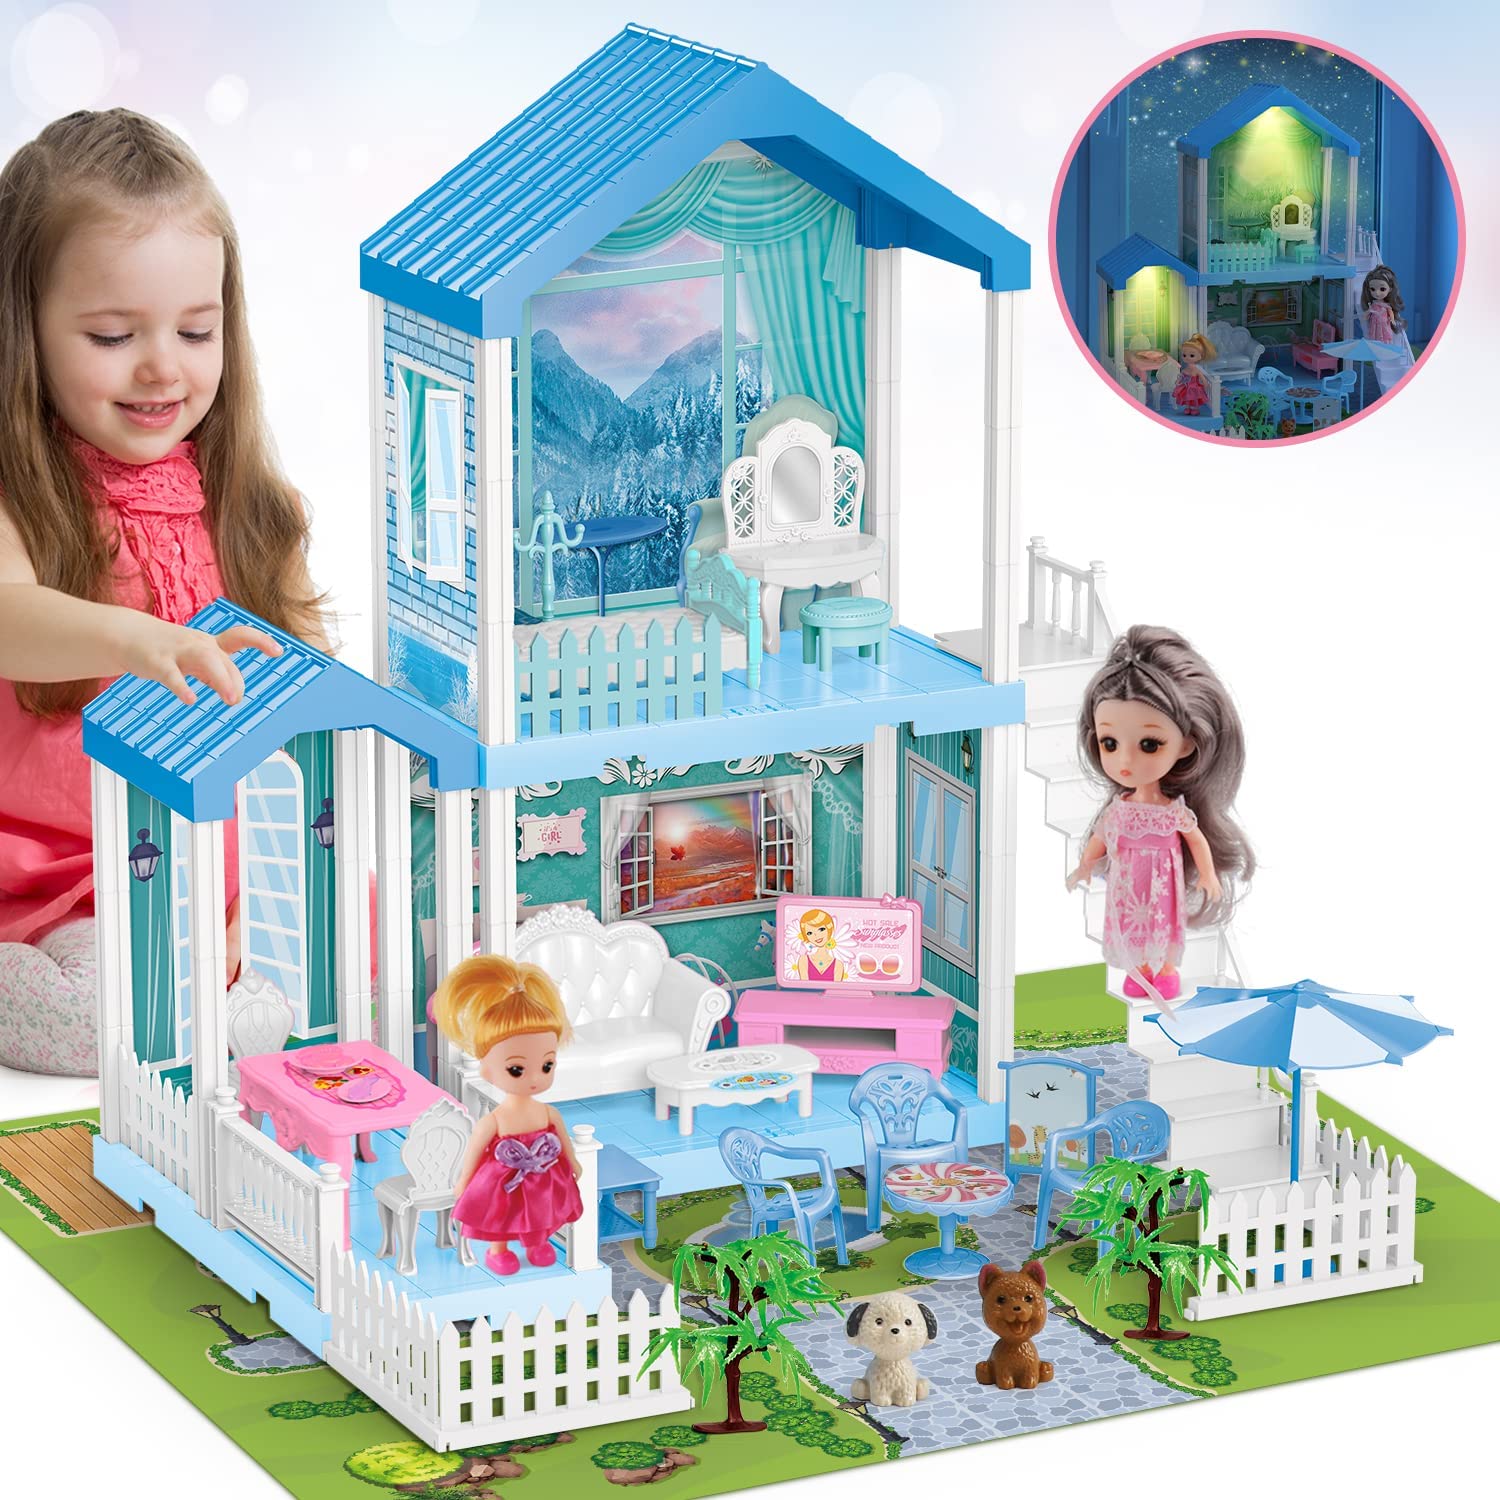 TOY Life Dollhouse - Doll House 4-5 Year Old with Lights - Toddler Girls Doll House 3-5 Year Old 20